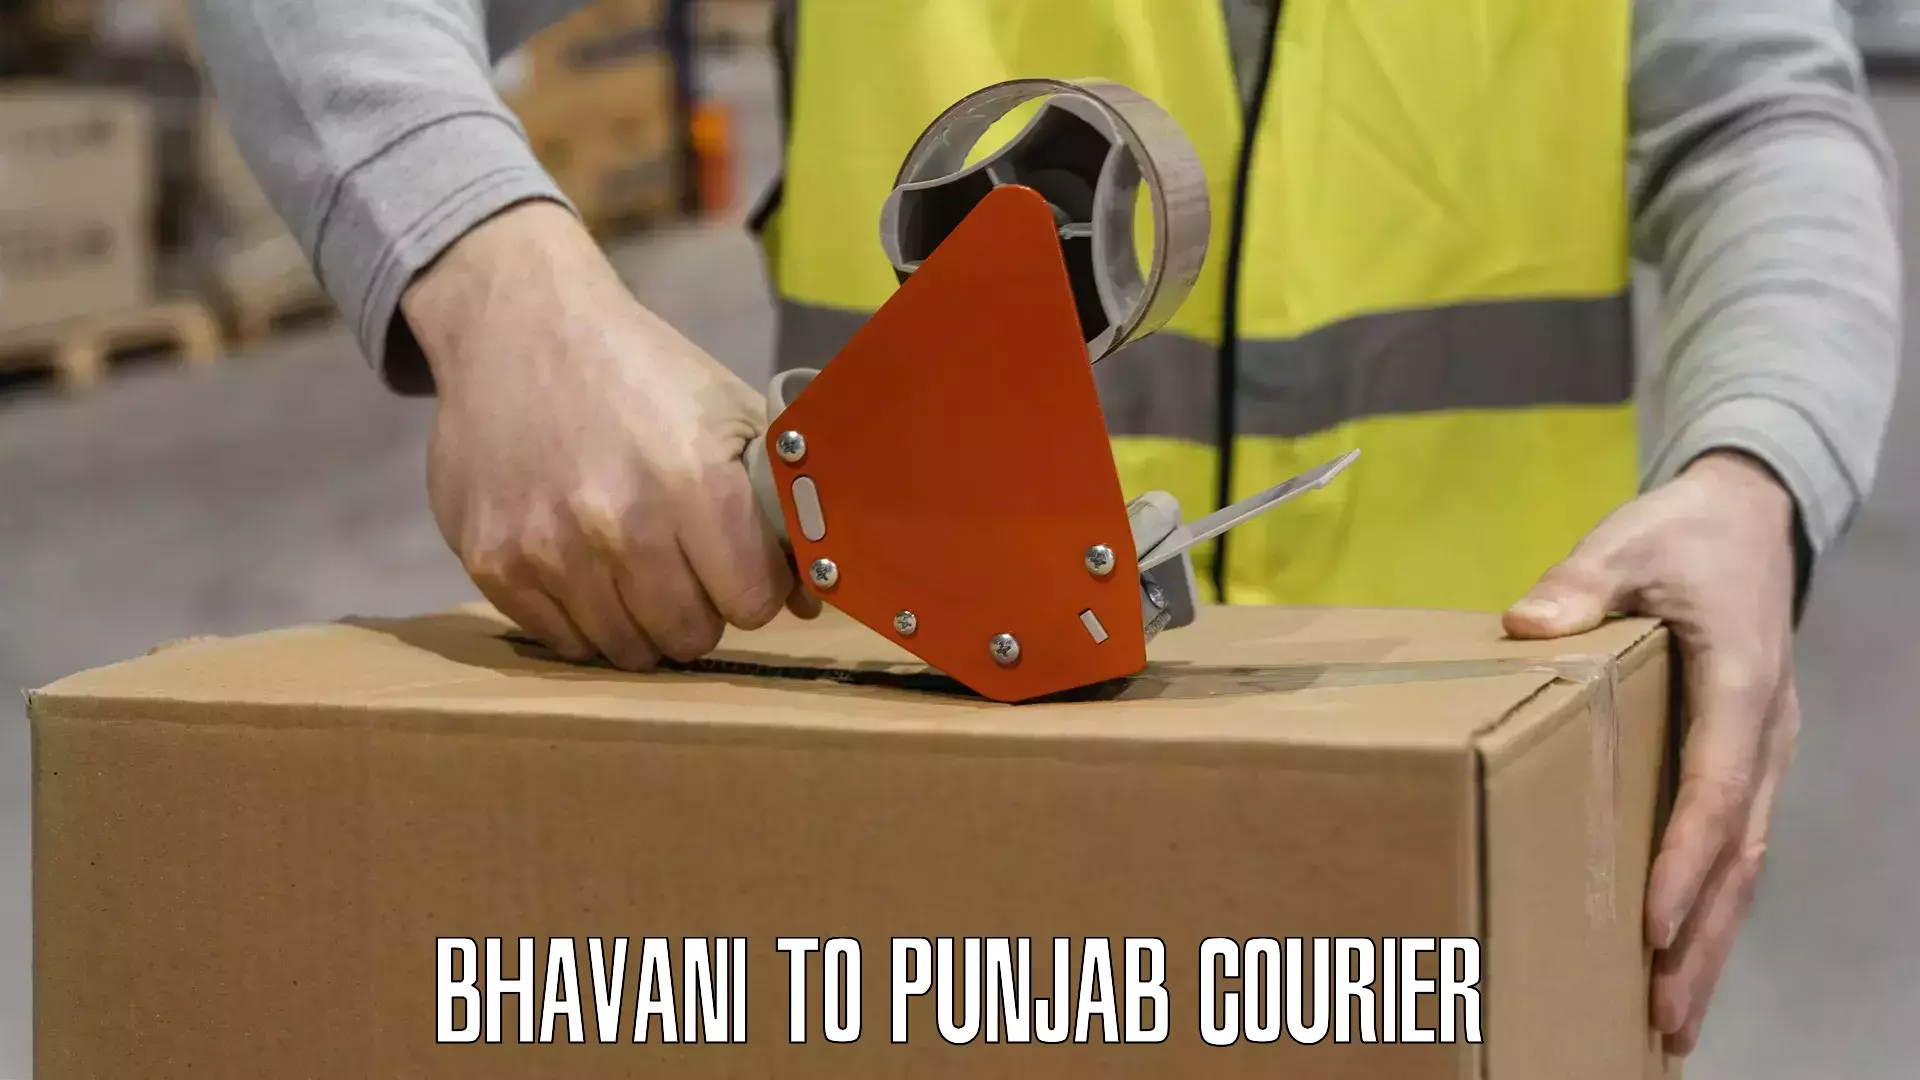 Nationwide courier service Bhavani to Punjab